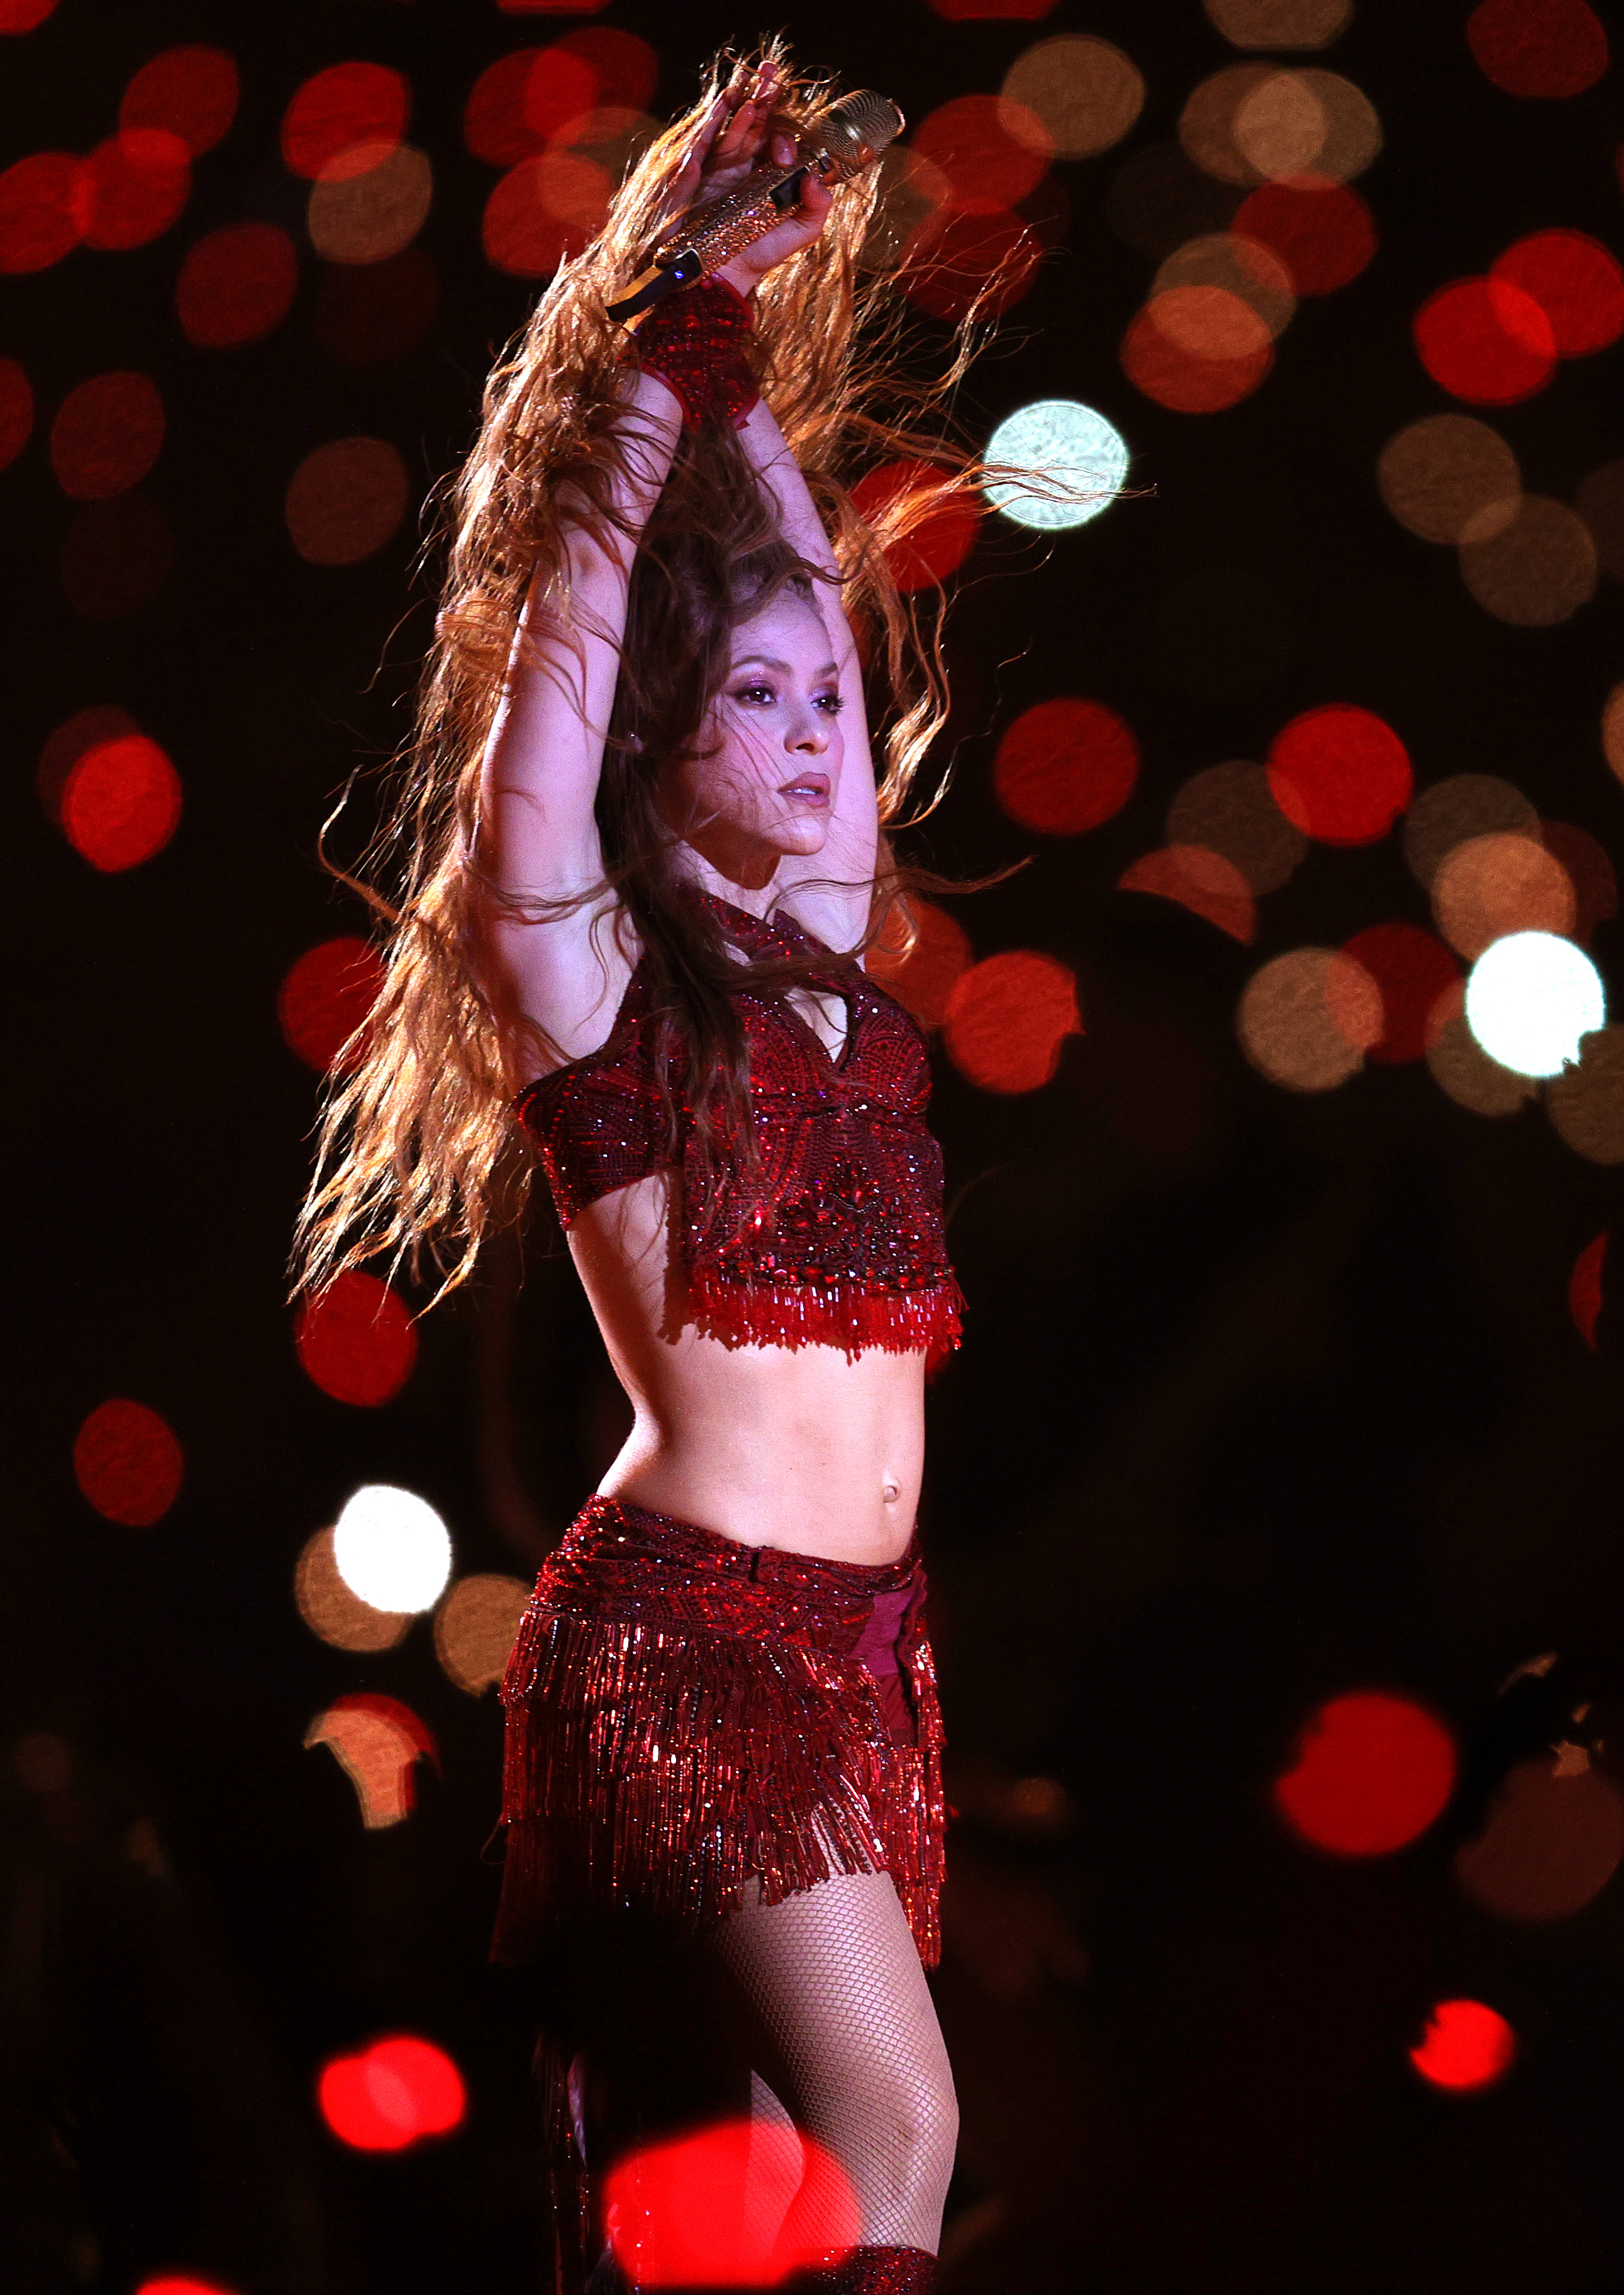 MIAMI, FLORIDA - FEBRUARY 02: Colombian singer Shakira performs during the Pepsi Super Bowl LIV Halftime Show at Hard Rock Stadium on February 02, 2020 in Miami, Florida. (Photo by Tom Pennington/Getty Images)